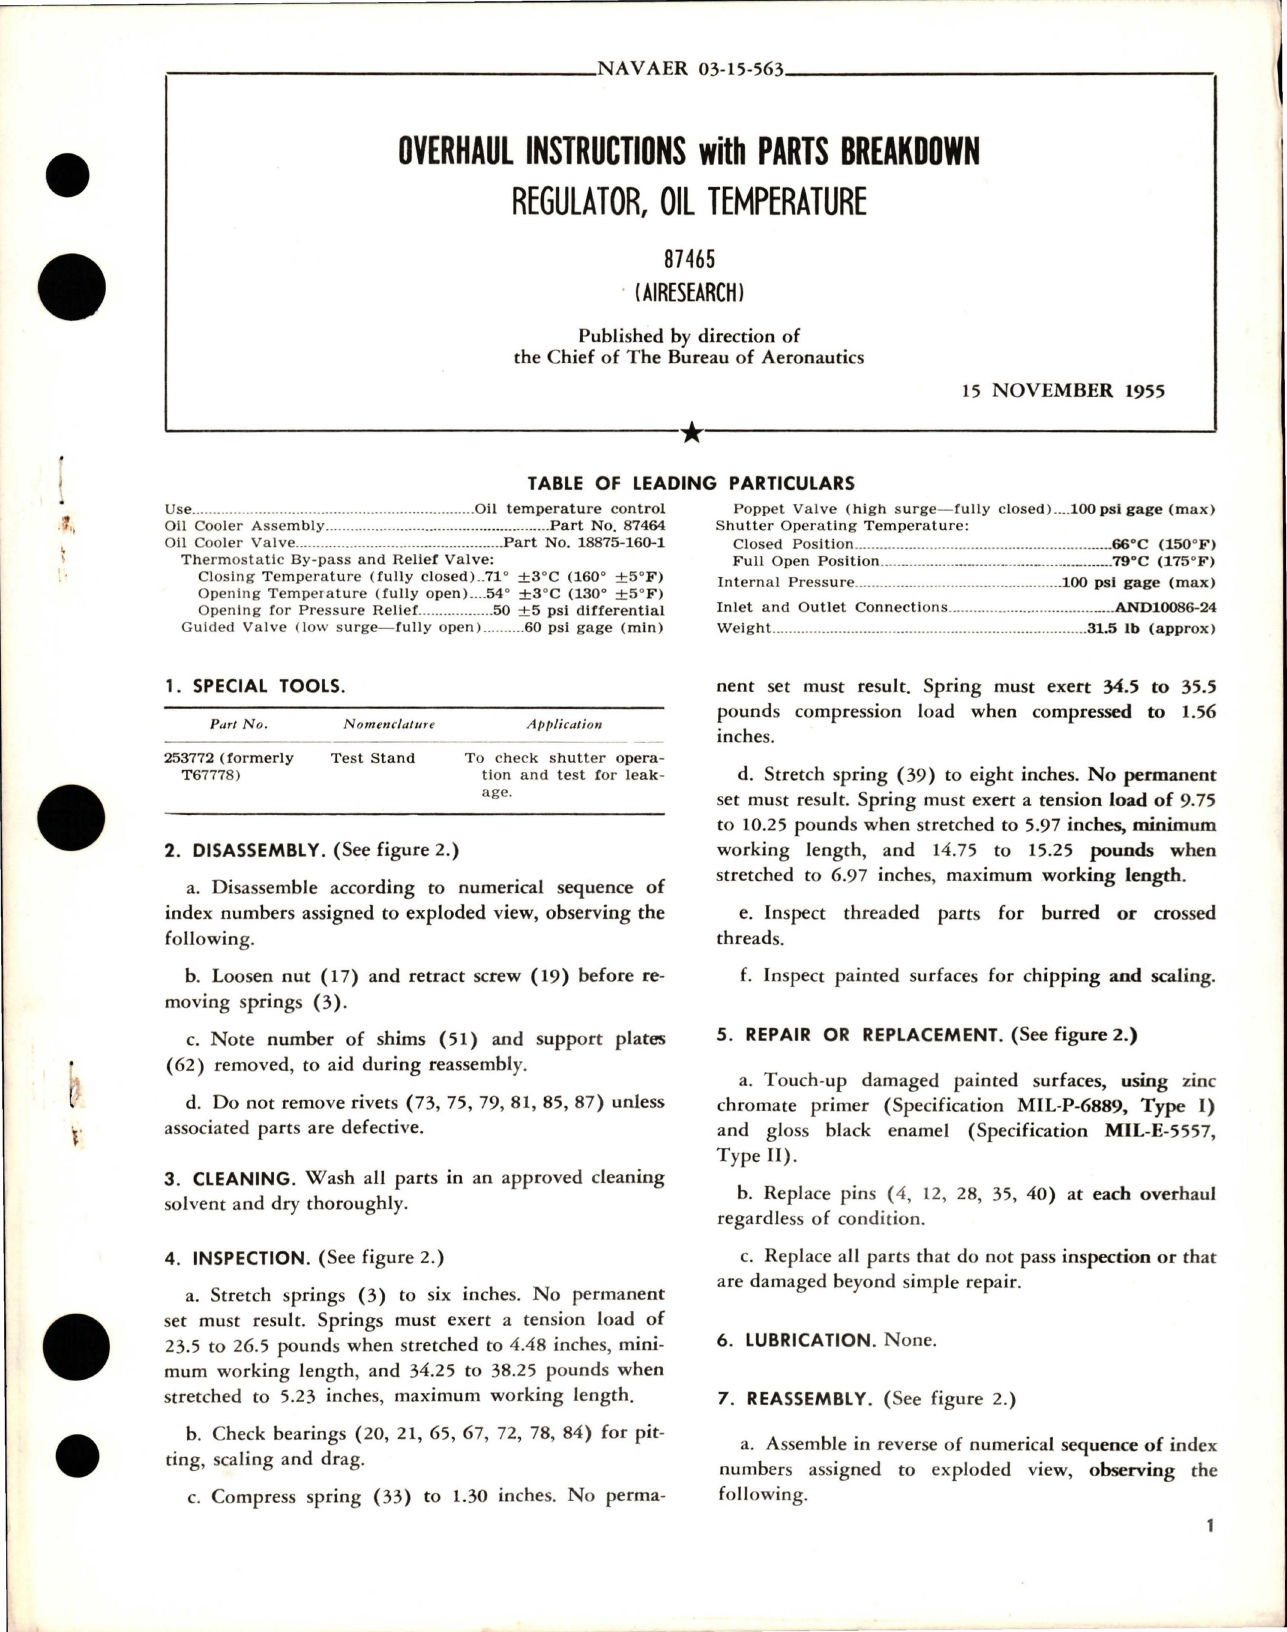 Sample page 1 from AirCorps Library document: Overhaul Instructions with Parts Breakdown for Oil Temperature Regulator - 87465 